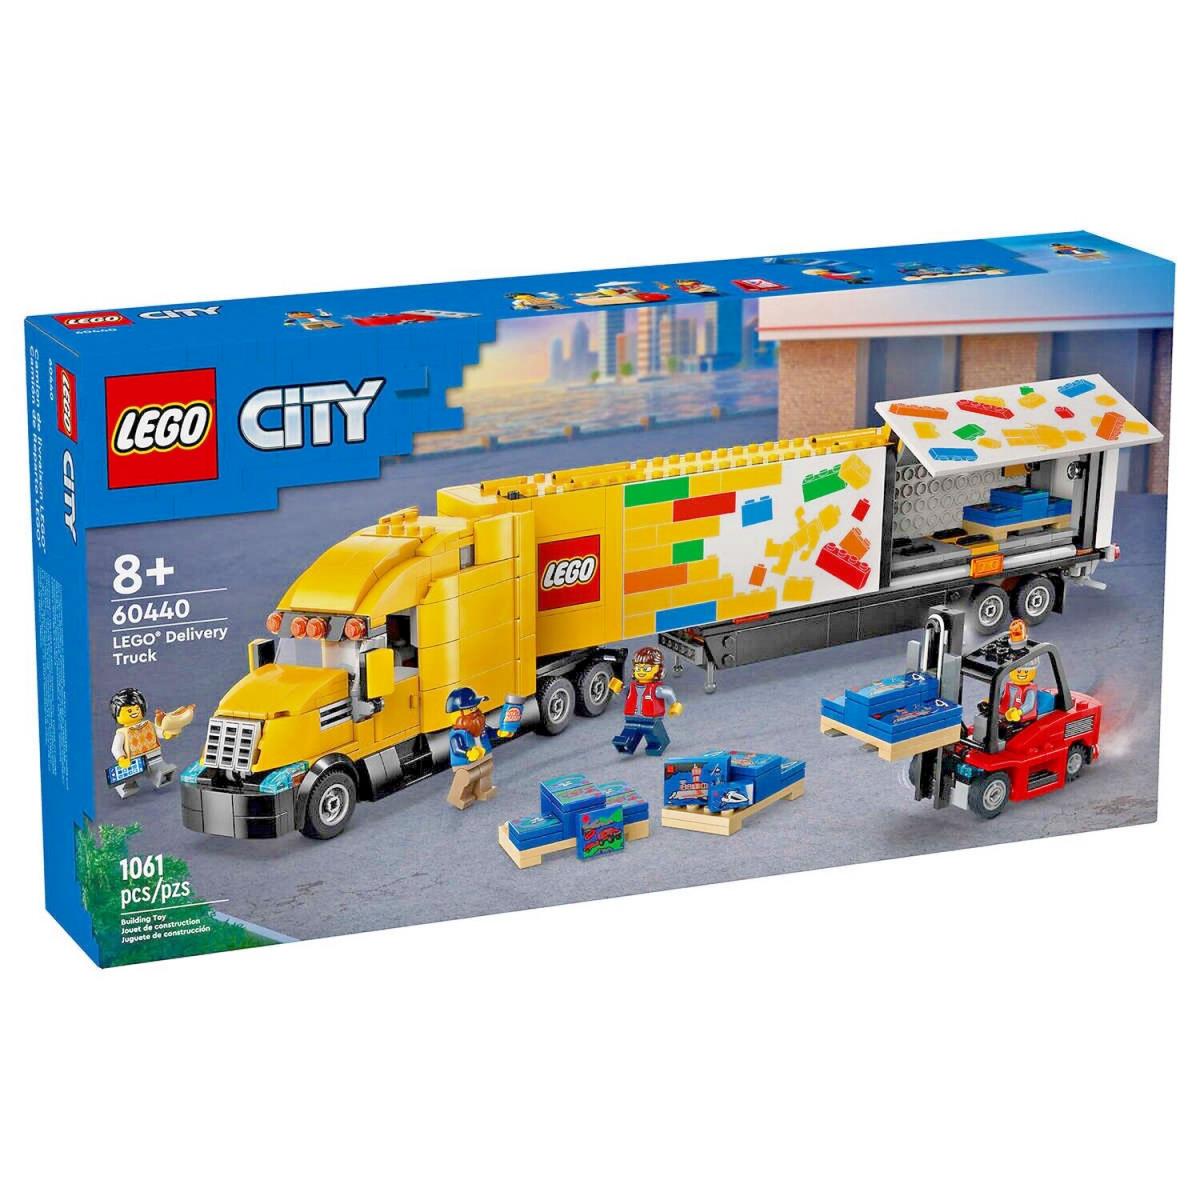 Lego City Sets Delivery Truck 60440 Kits Toys 1061 Pieces Blocks Box Ages 8+